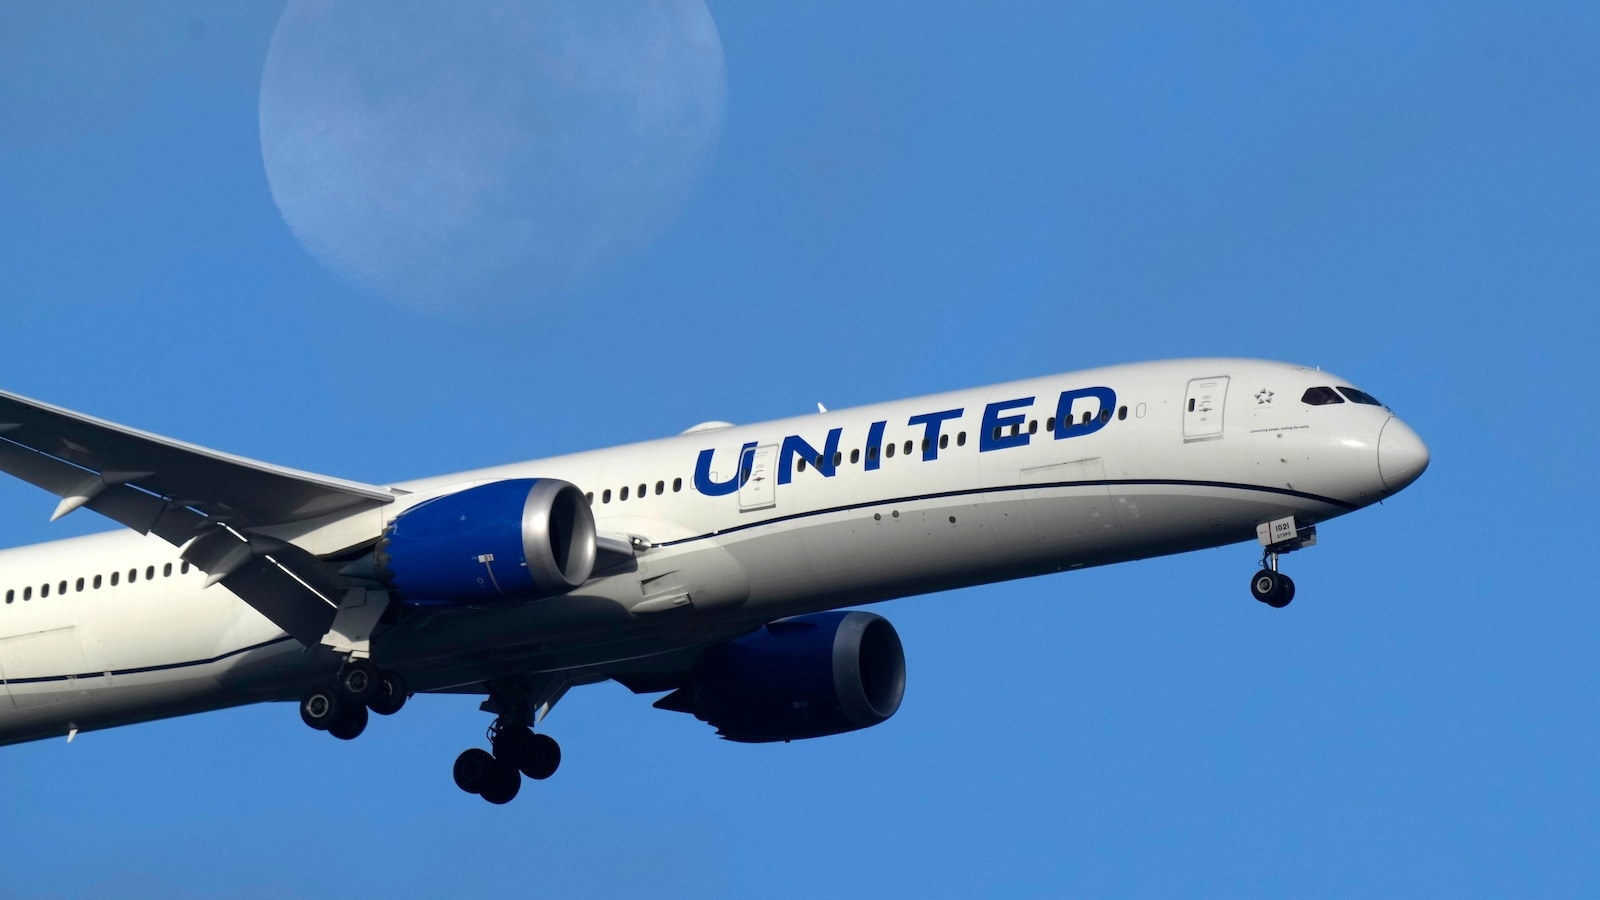 Emergency Landing Made by United Airlines Plane Following Possible Door Issue Warning